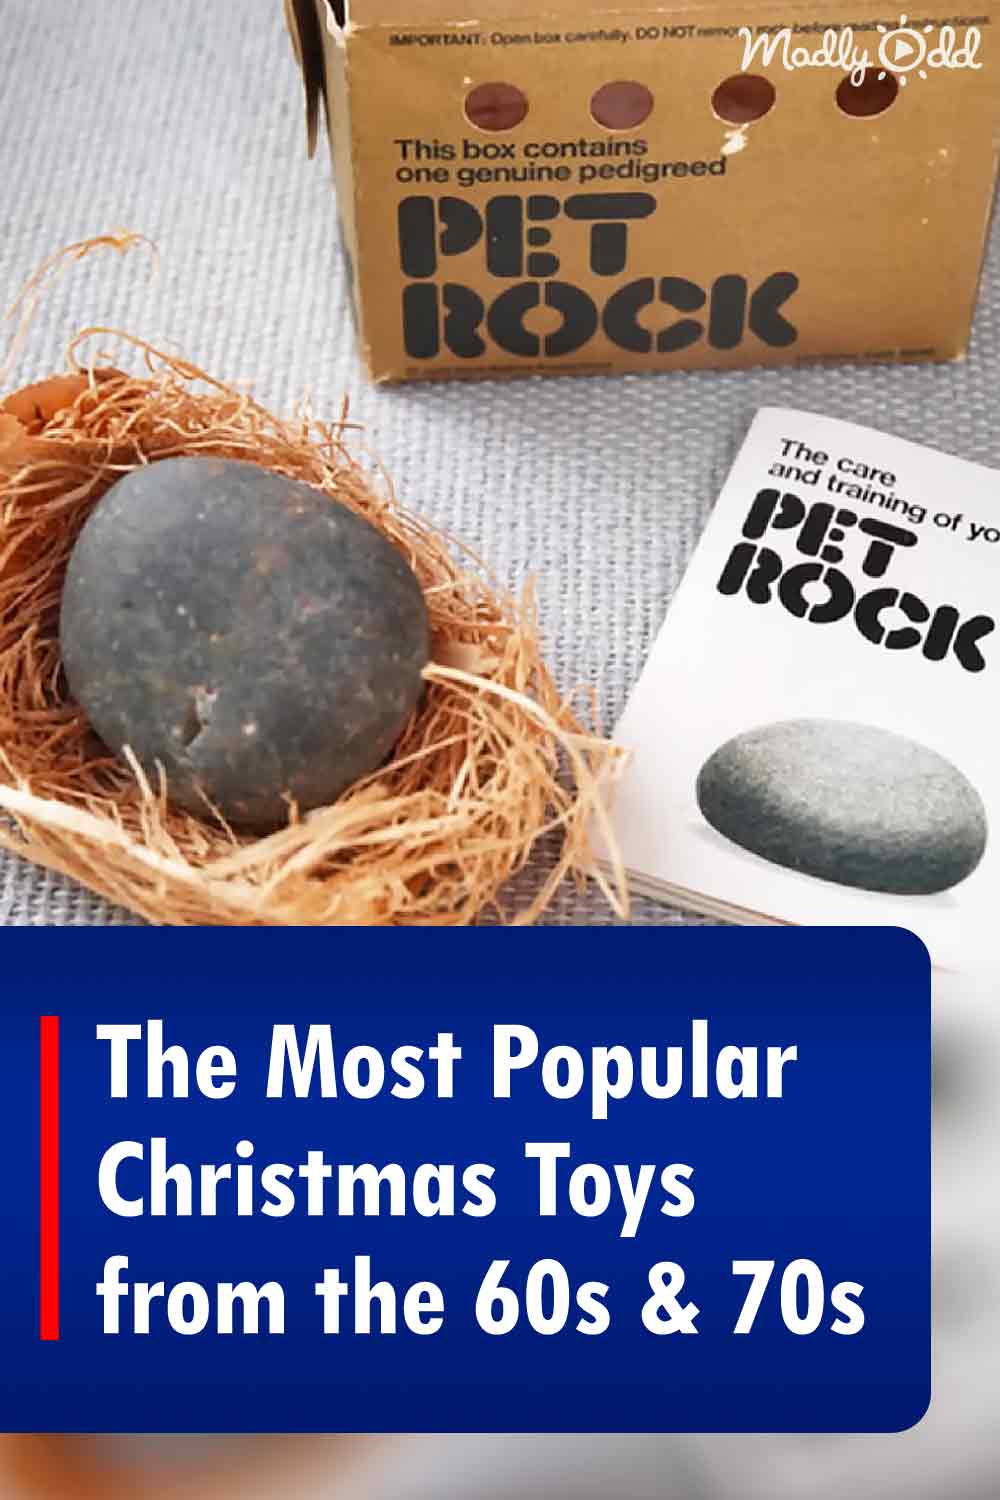 The Most Popular Christmas Toys from the 60s & 70s